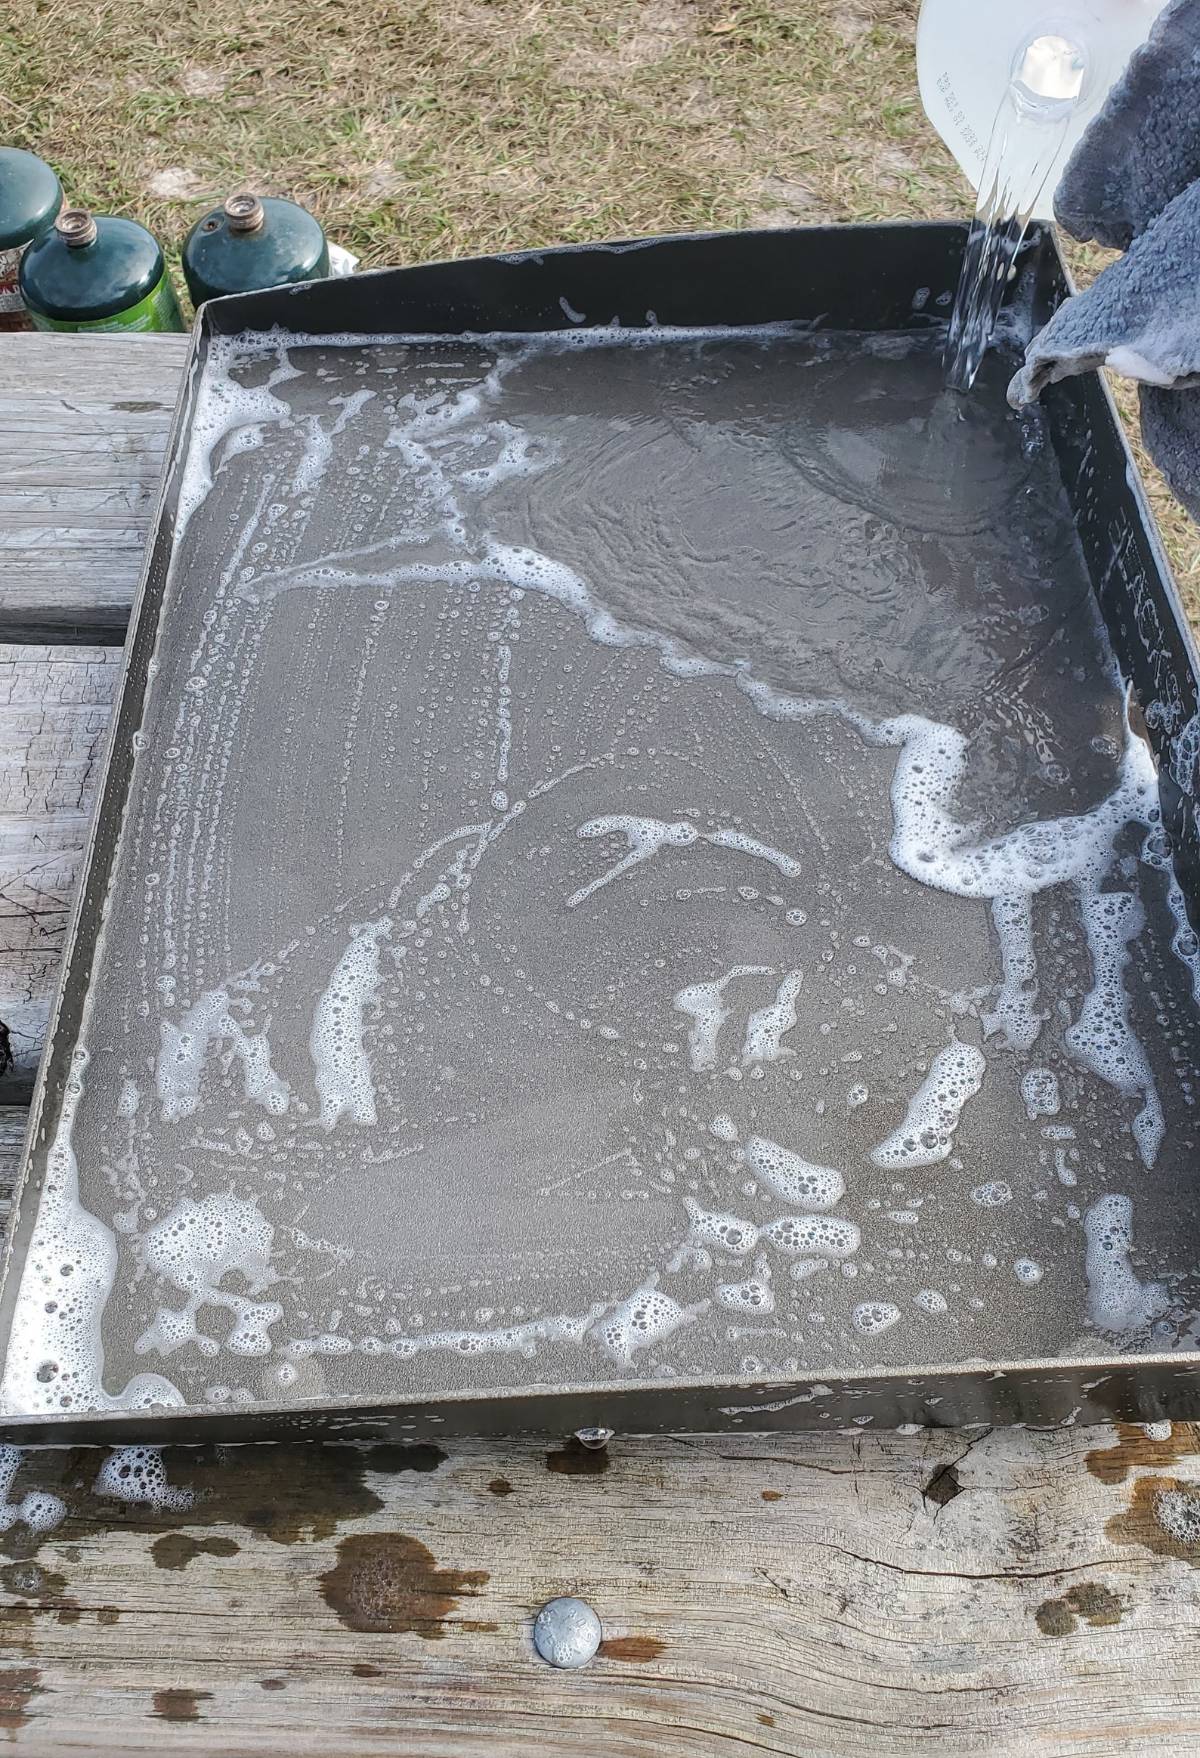 washing a blackstone griddle with soapy water